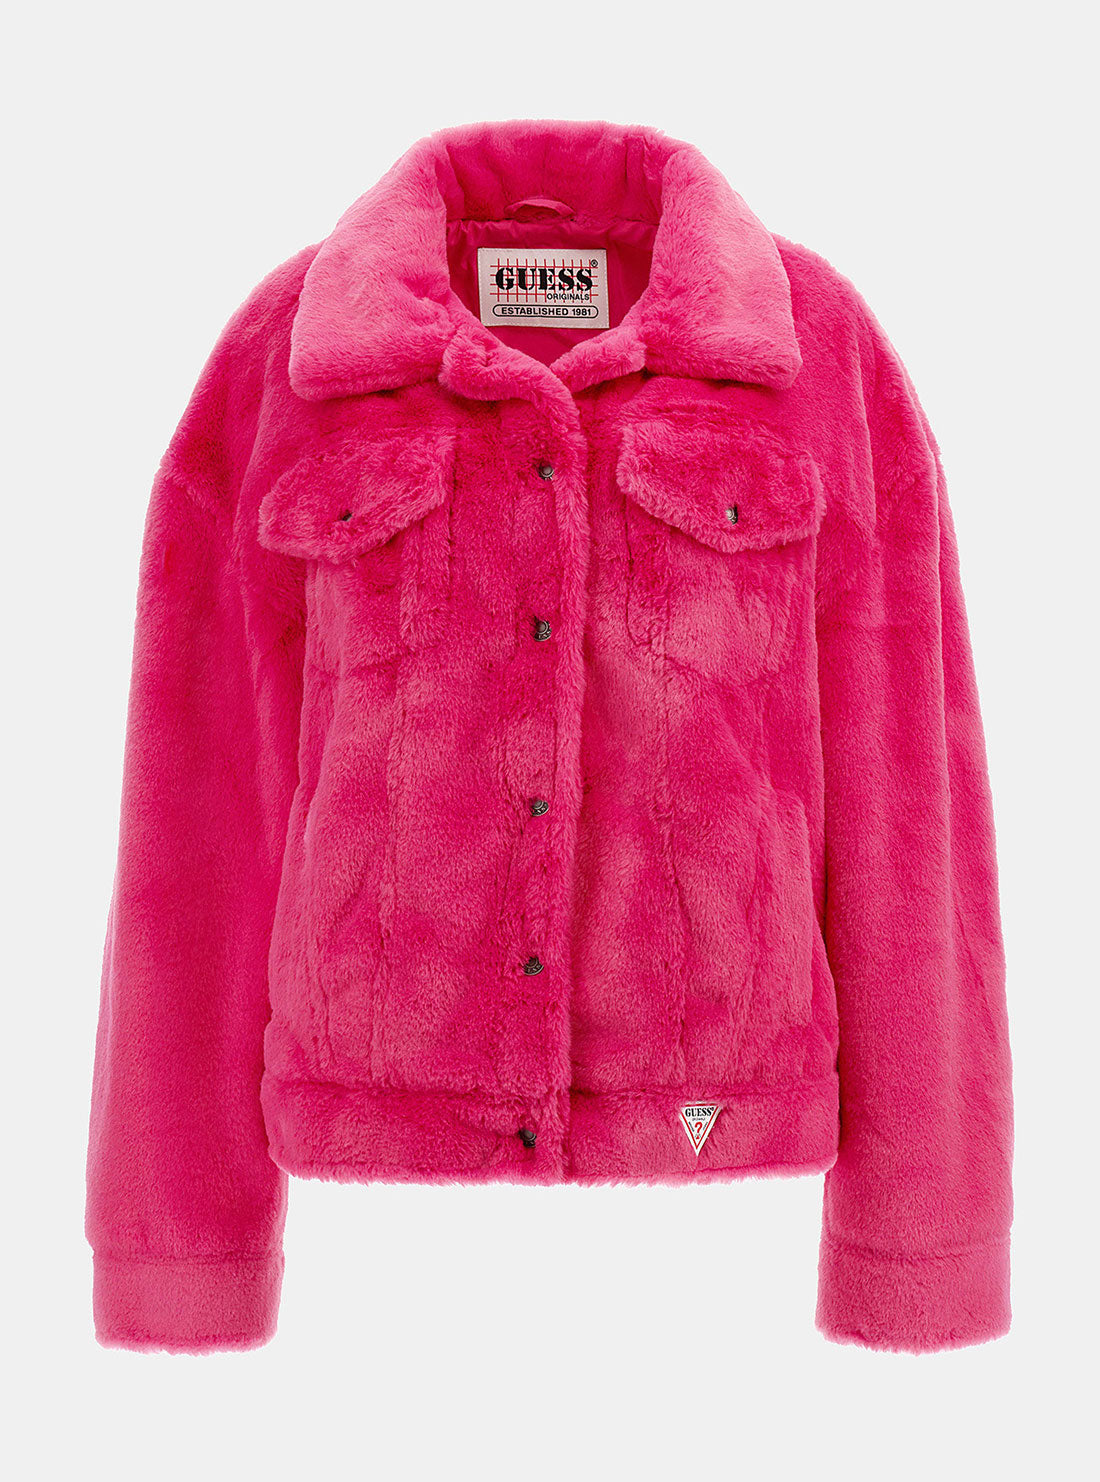 GUESS Women's Guess Originals Berry Kelly Faux Fur Jacket W2RN03R8BV0 Ghost View